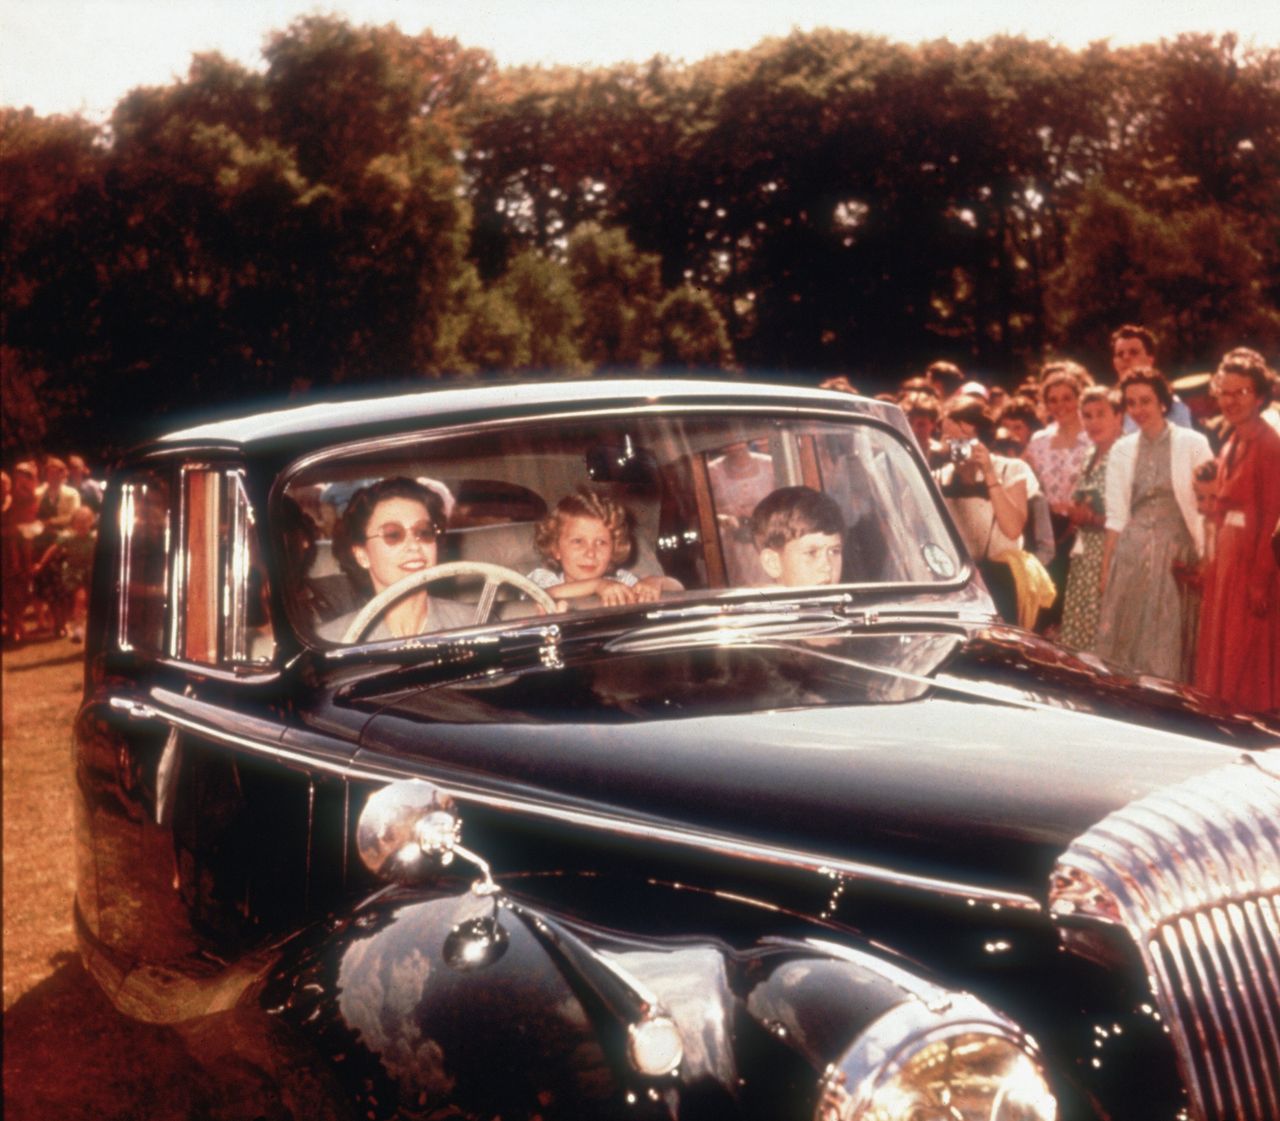 Queen Elizabeth II driving a Daimler saloon car with Prince Charles and Princess Anne as passengers, circa 1957.